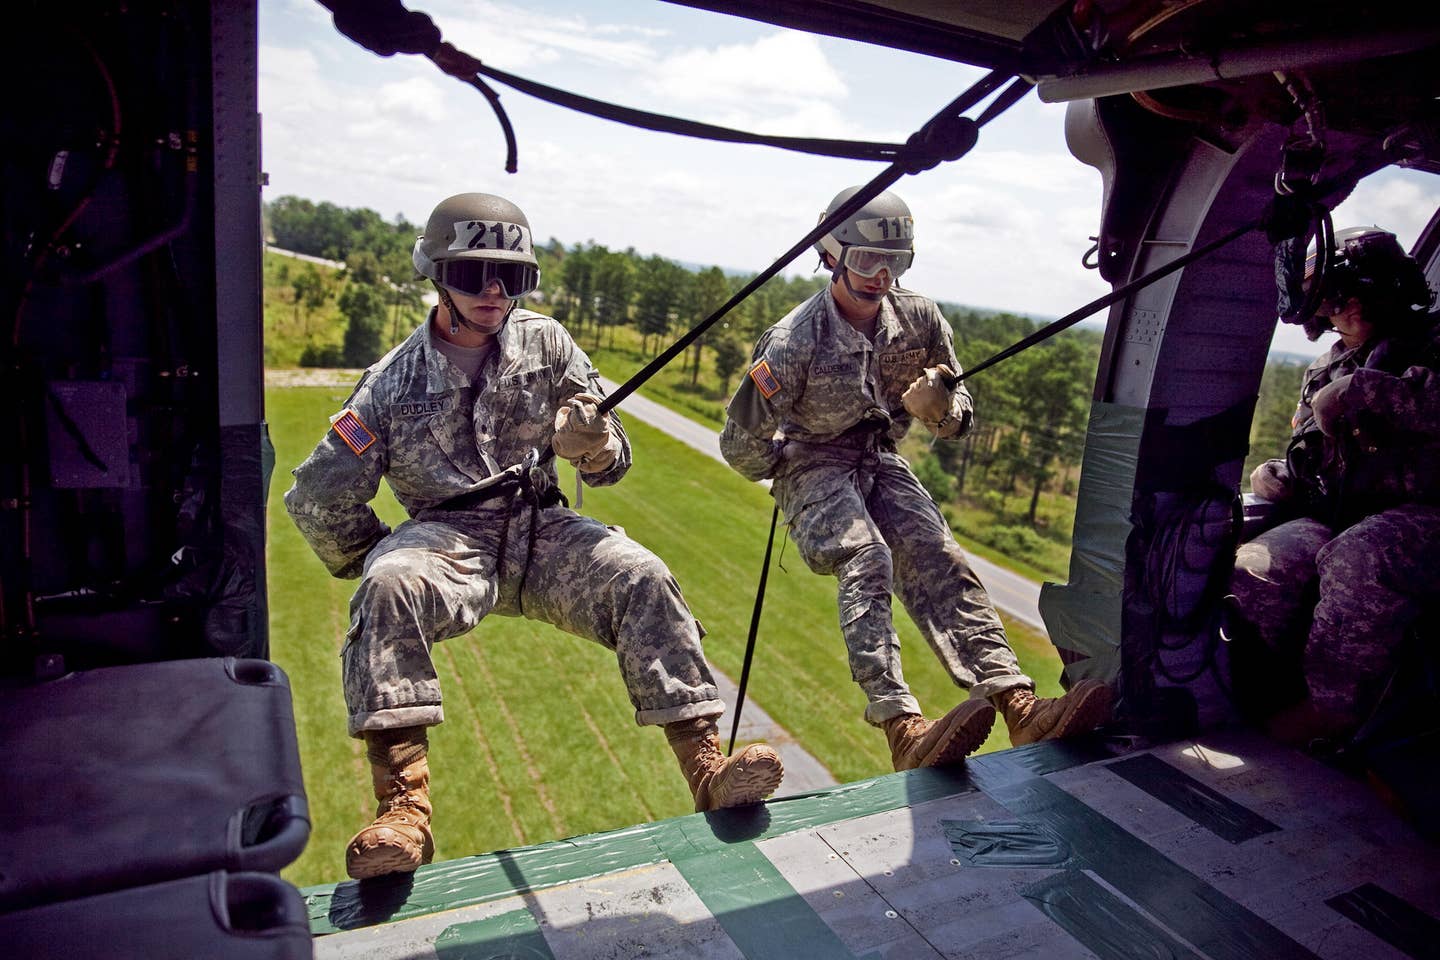 Reserve Officers' Training Corps (ROTC) Cadets Timothy Dudley and Nicholas Calderon move into position to rappel out of a UH-60 Black Hawk Helicopter during the last phase of the Air Assault Course at Dickman Field, July 23, 2013 at Fort Benning, Georgia.